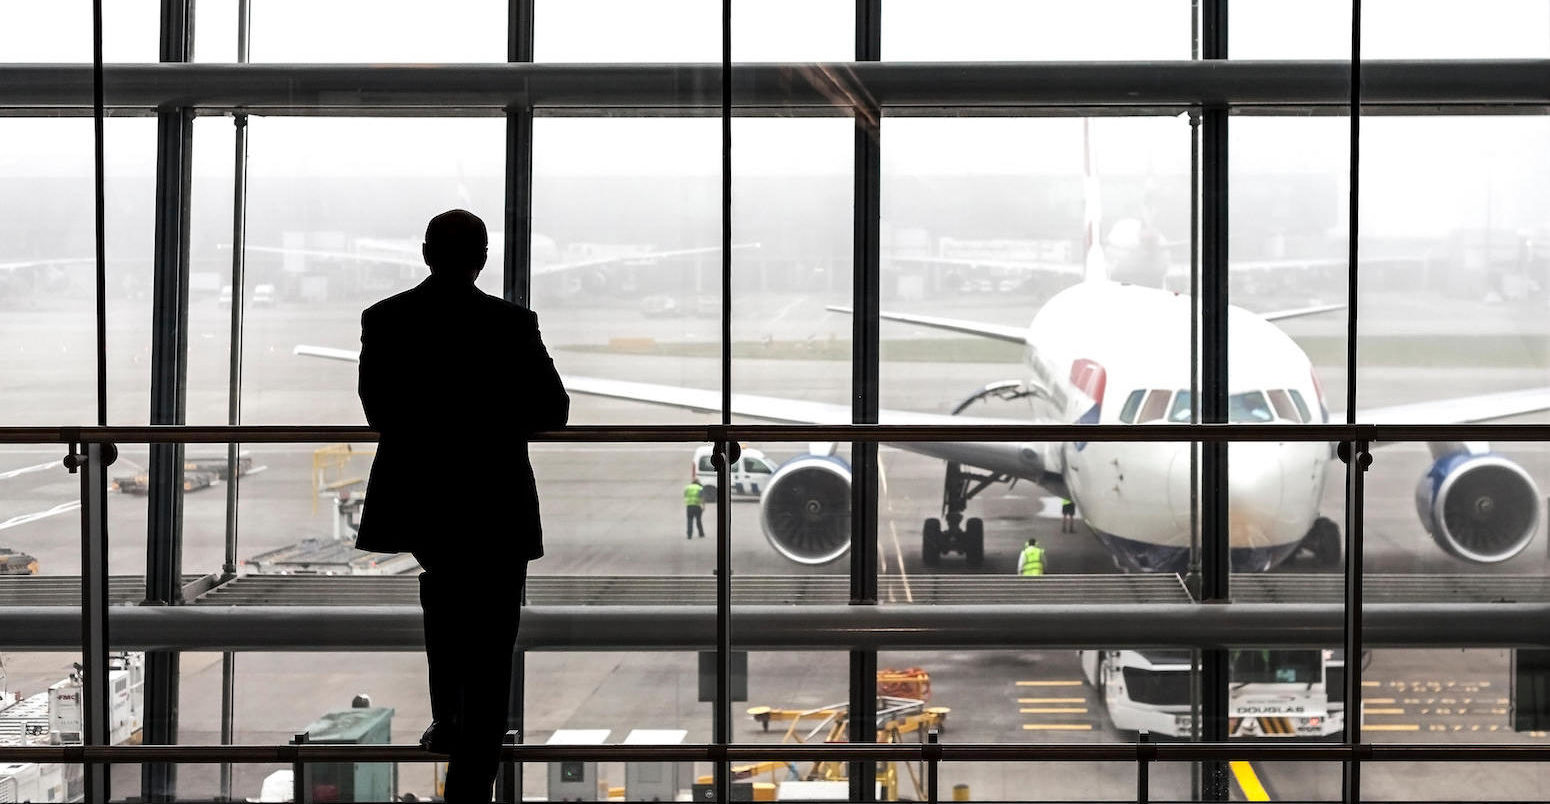 Silhouette of a passenger waiting for a plane at Heathrow airport, London, UK.